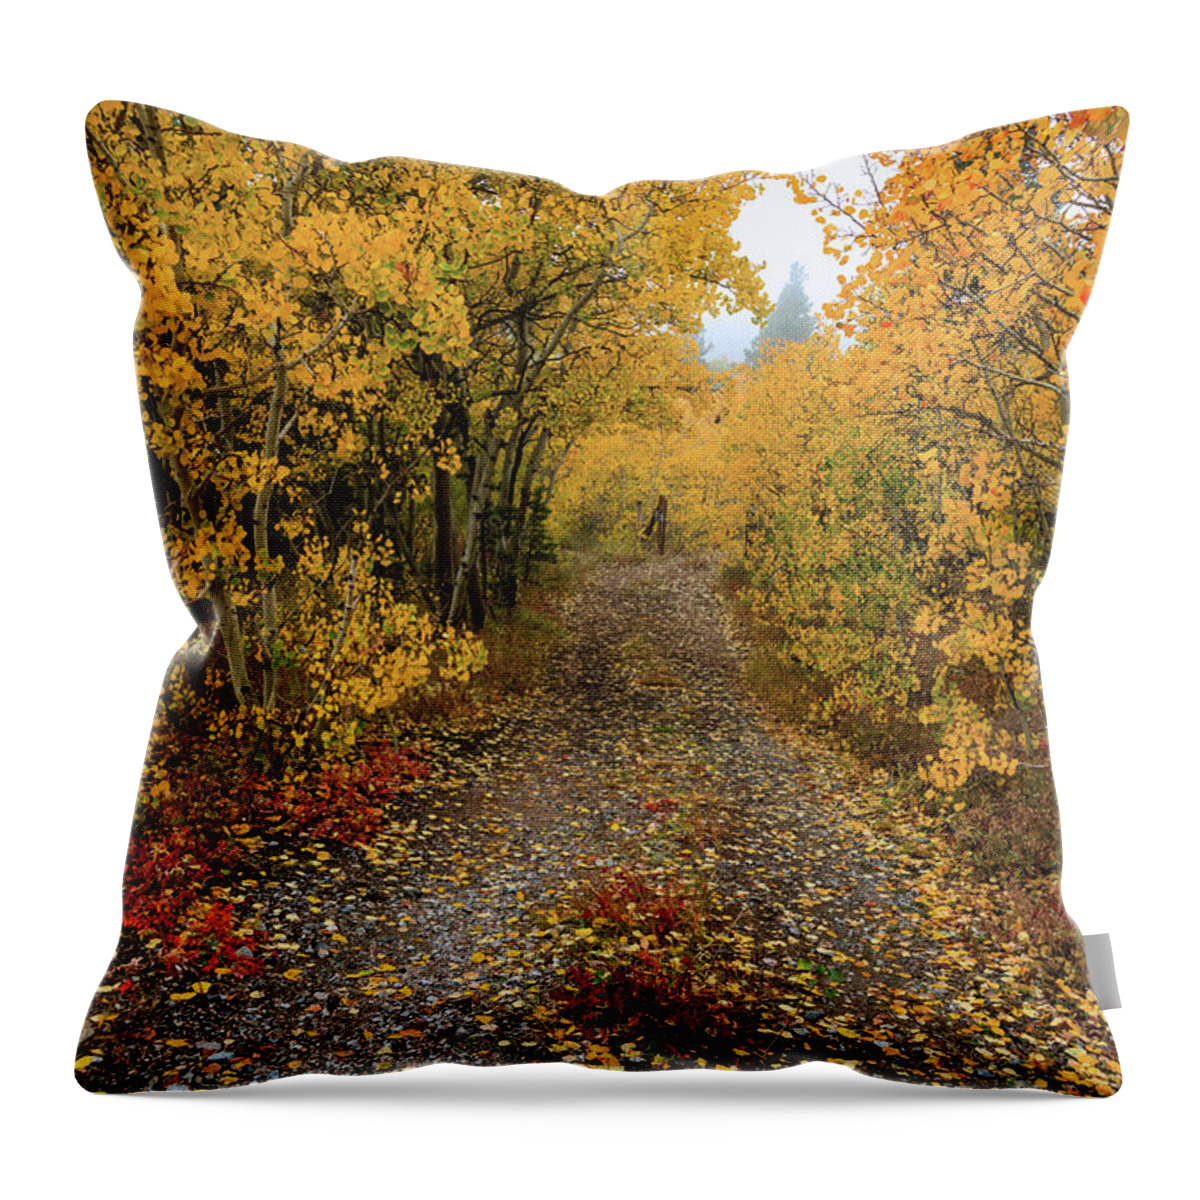 Path Throw Pillow featuring the photograph Colorful Autumn Path by James BO Insogna